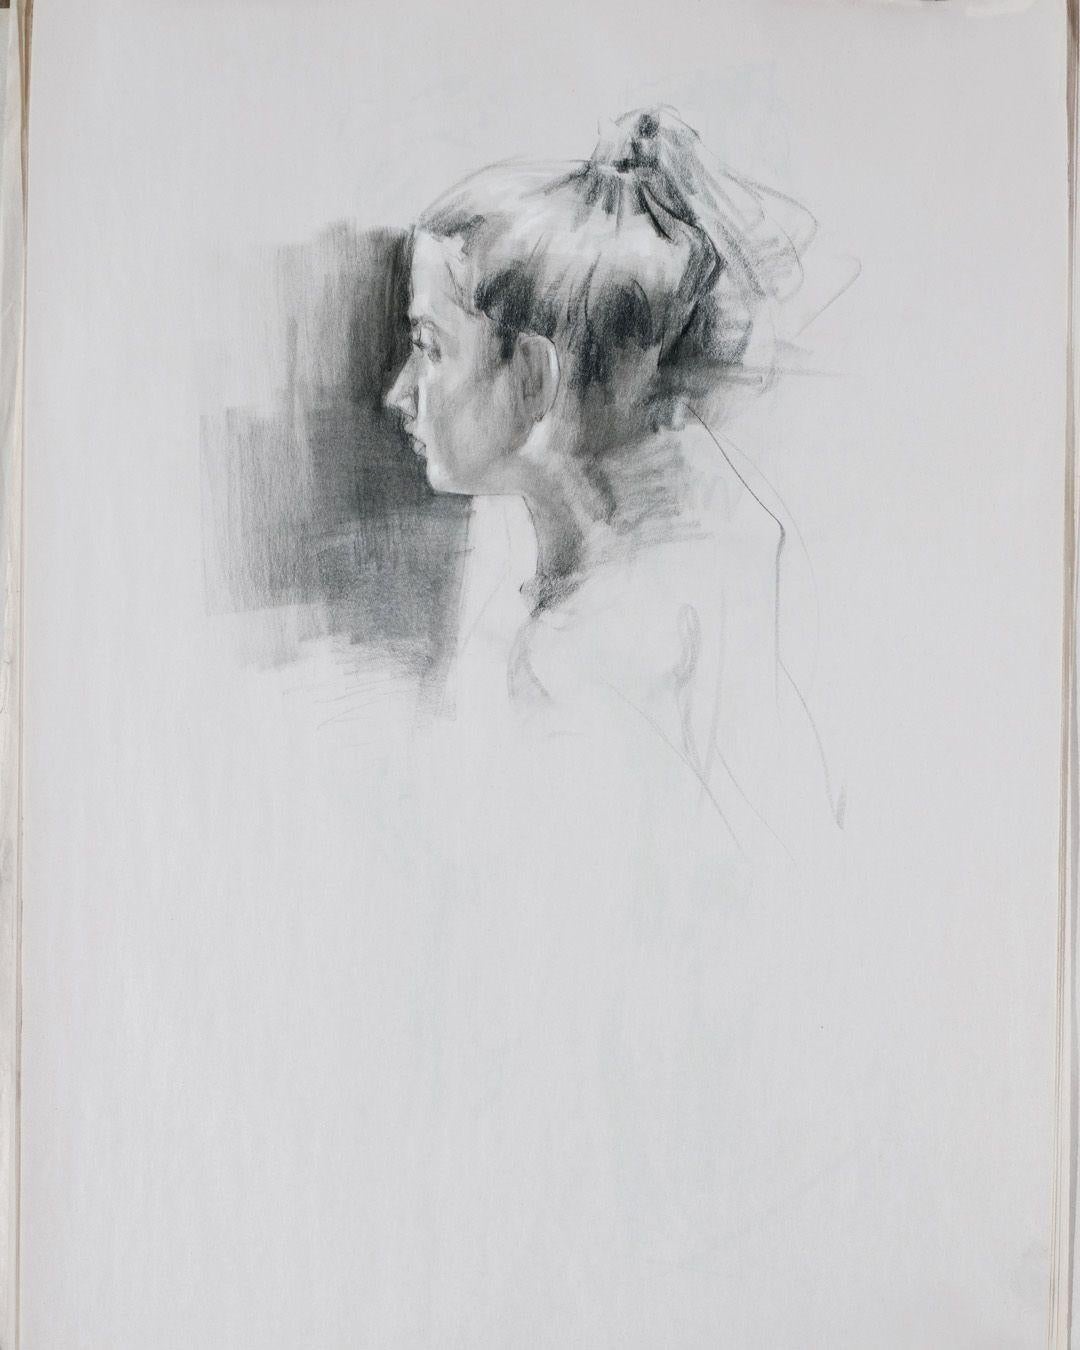 Set of 5 Drawings - Charcoal on Newsprint #1, Drawing, Charcoal on Paper - Realist Art by Sergio Lopez